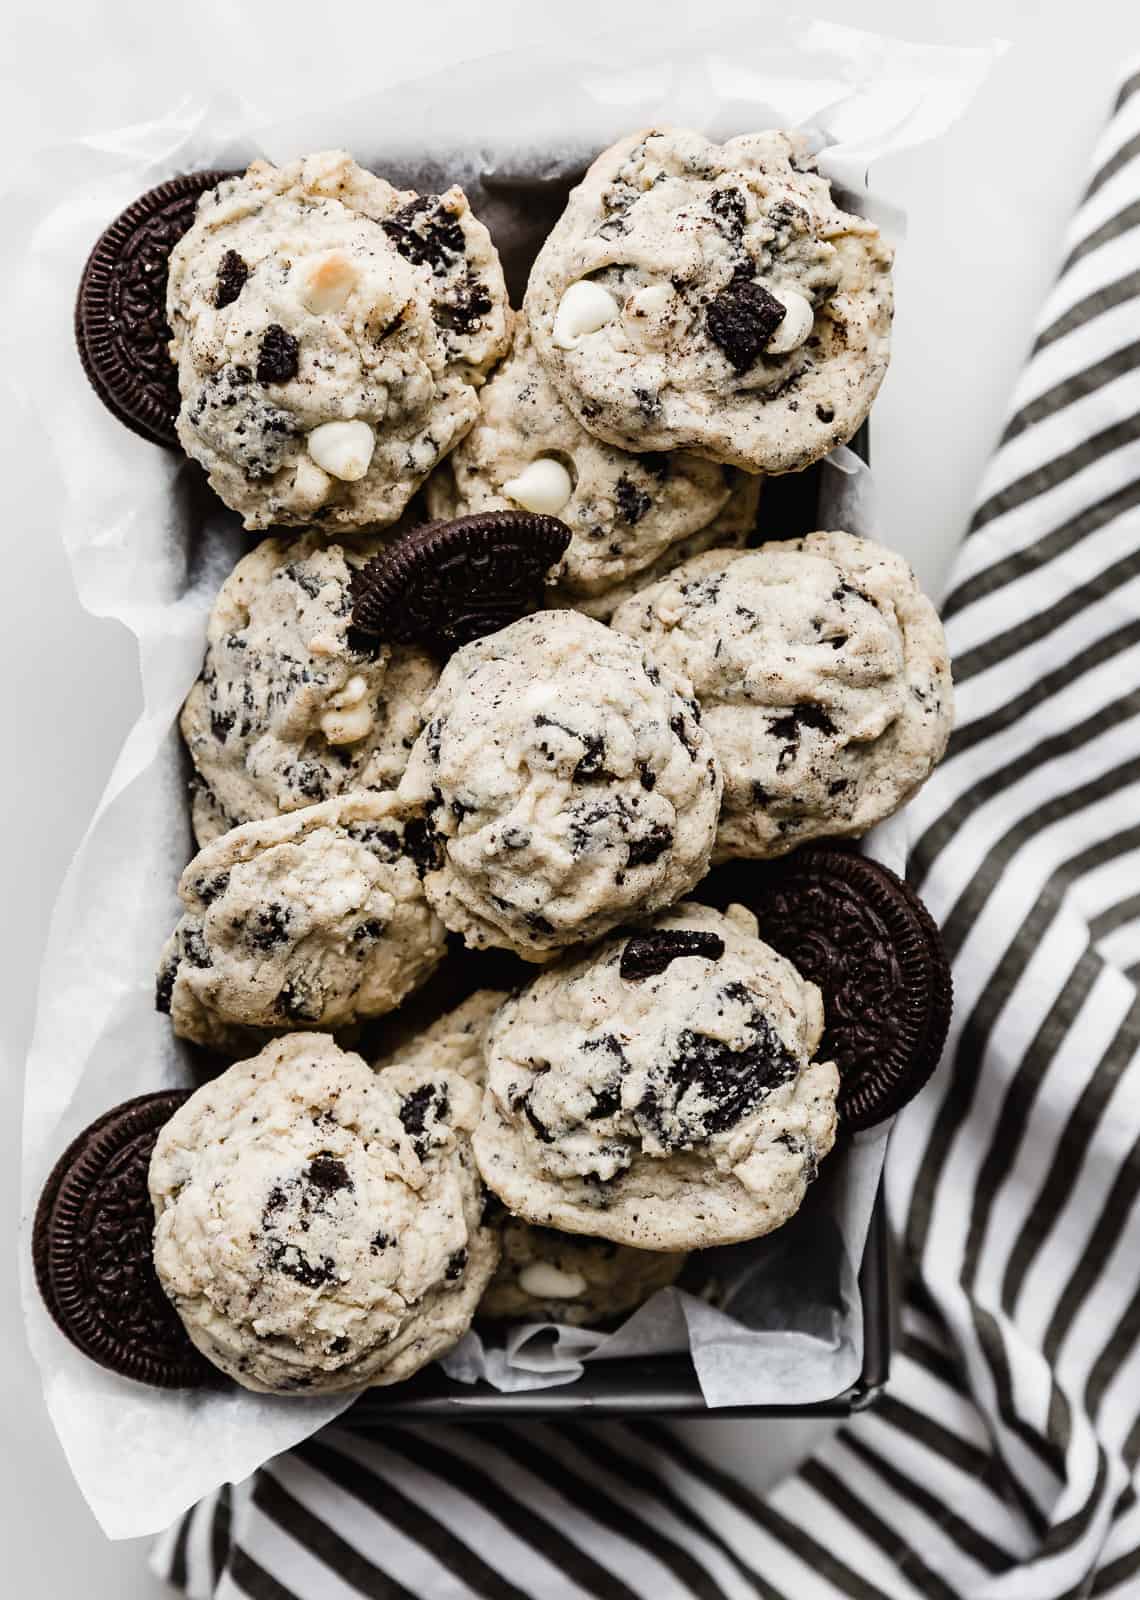 Cookies and Cream Cookies in a bread pan against a white background.